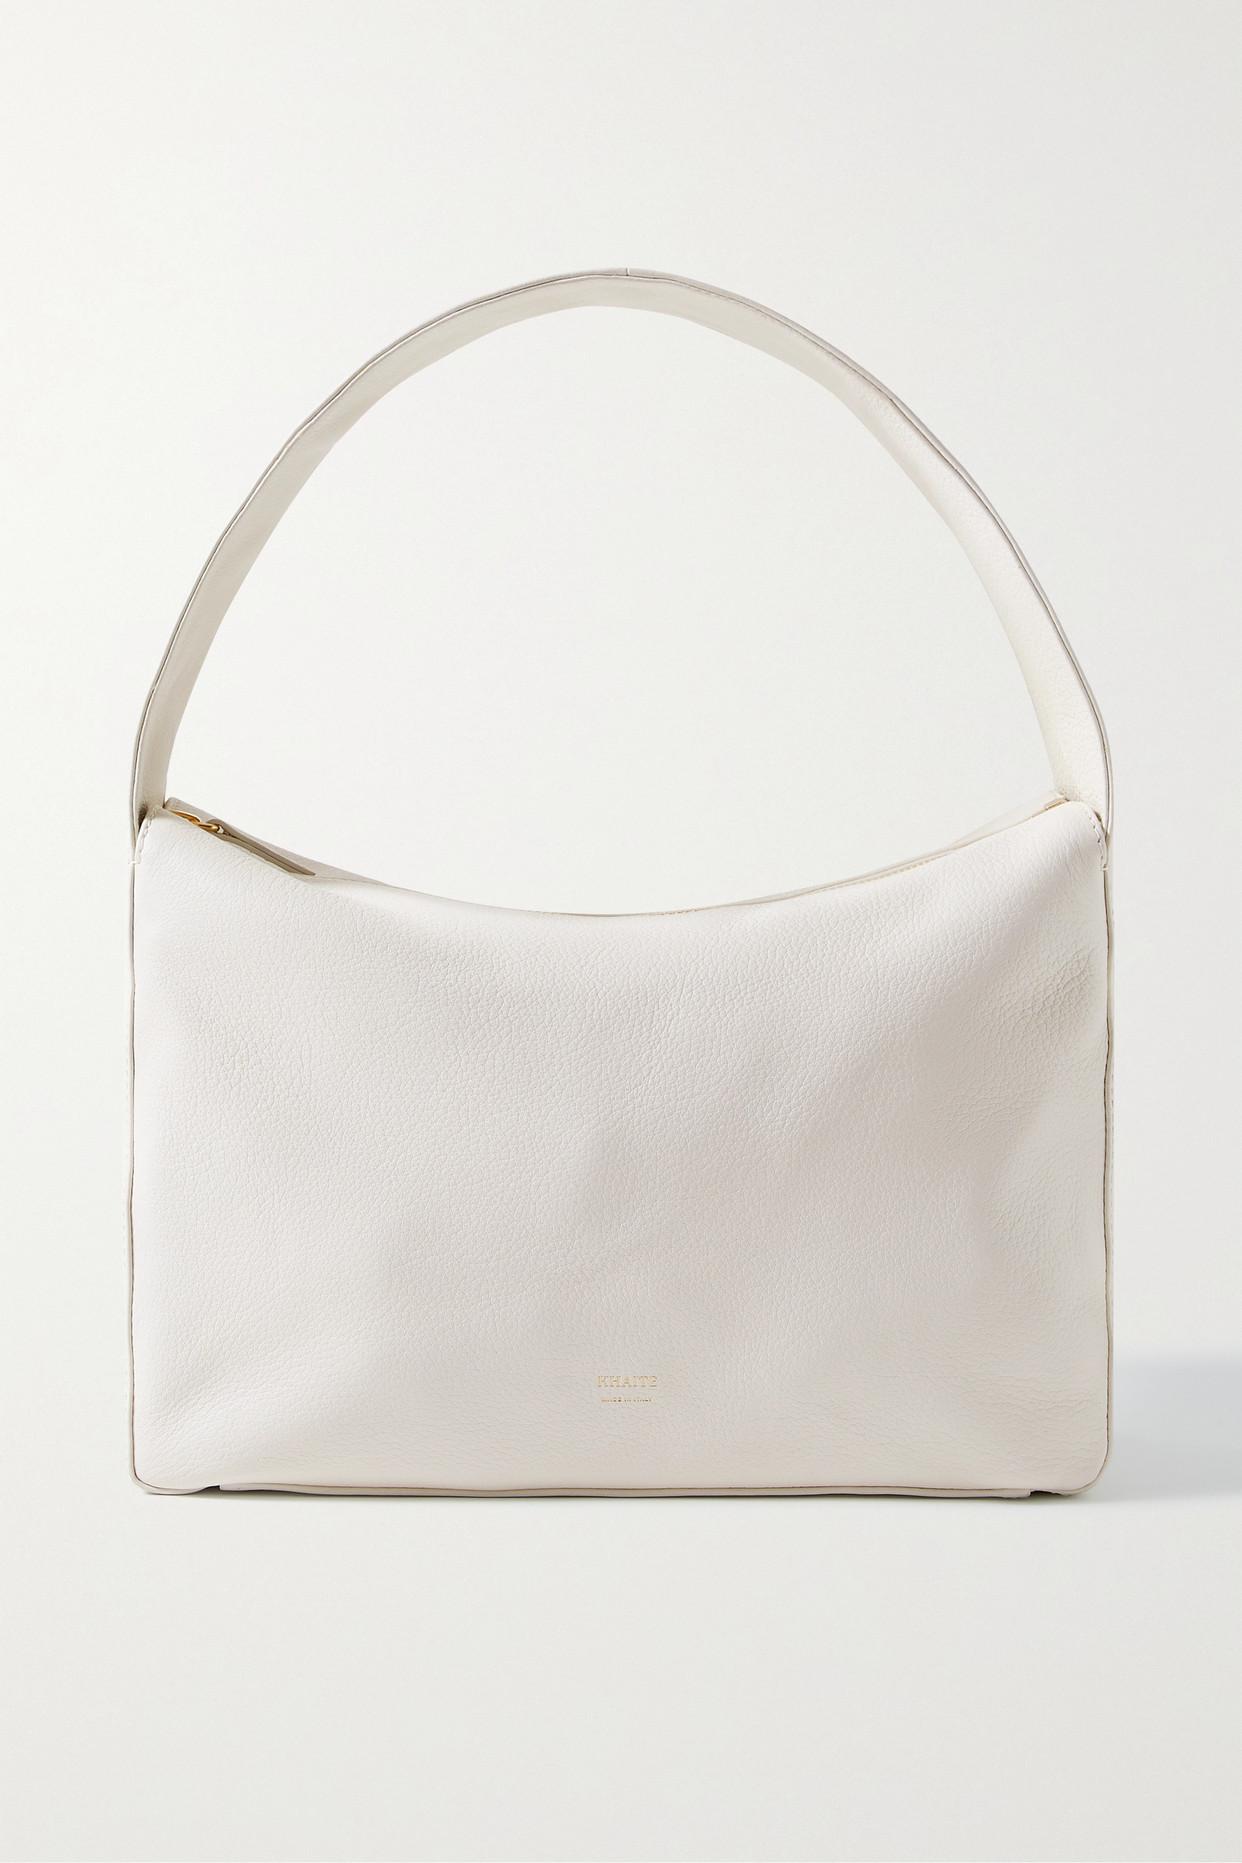 The Small Maeve Crossbody Bag in Off-White Pebbled Leather– KHAITE